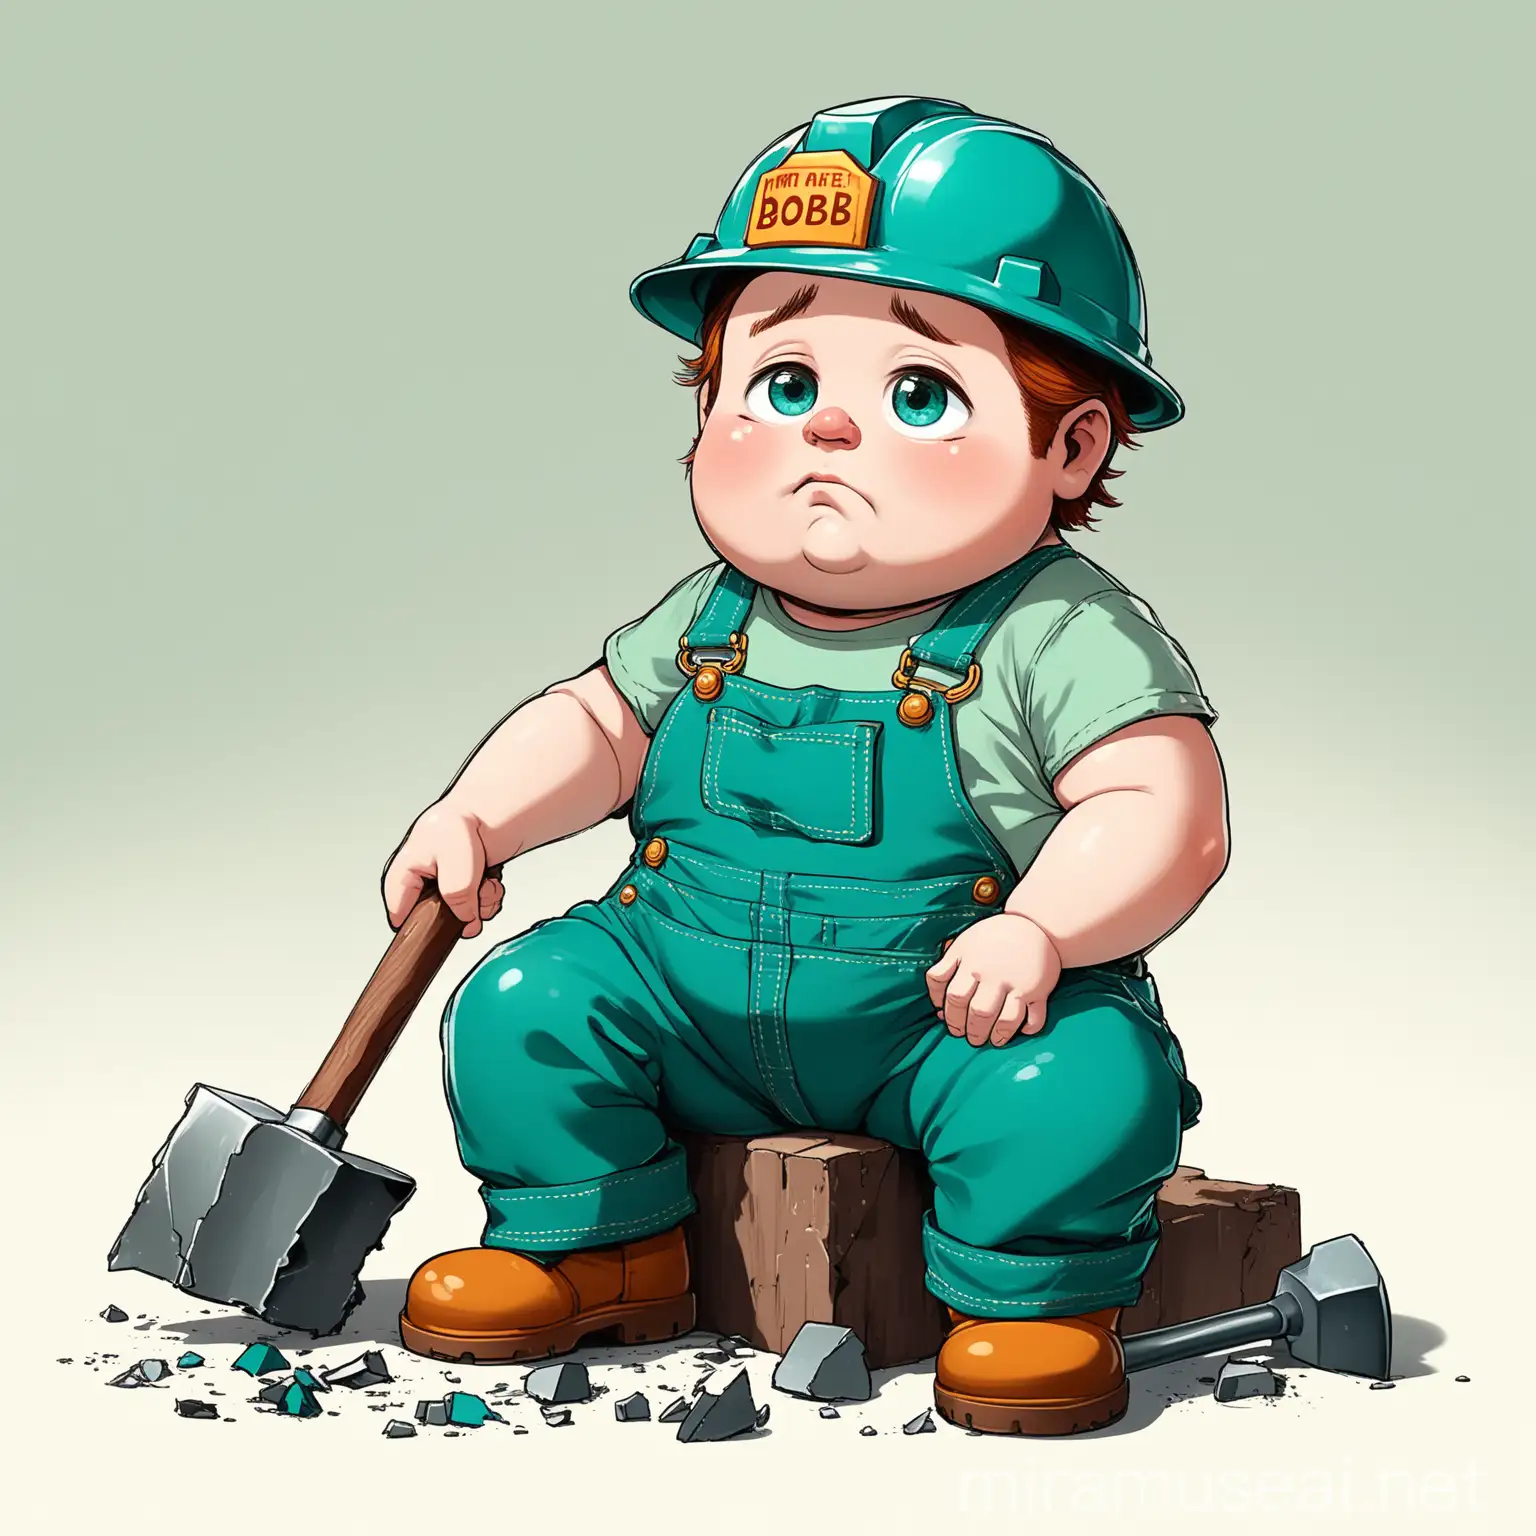 Sad Dwarf with Broken Hammer in Teal Shirt and Lawngreen Overalls